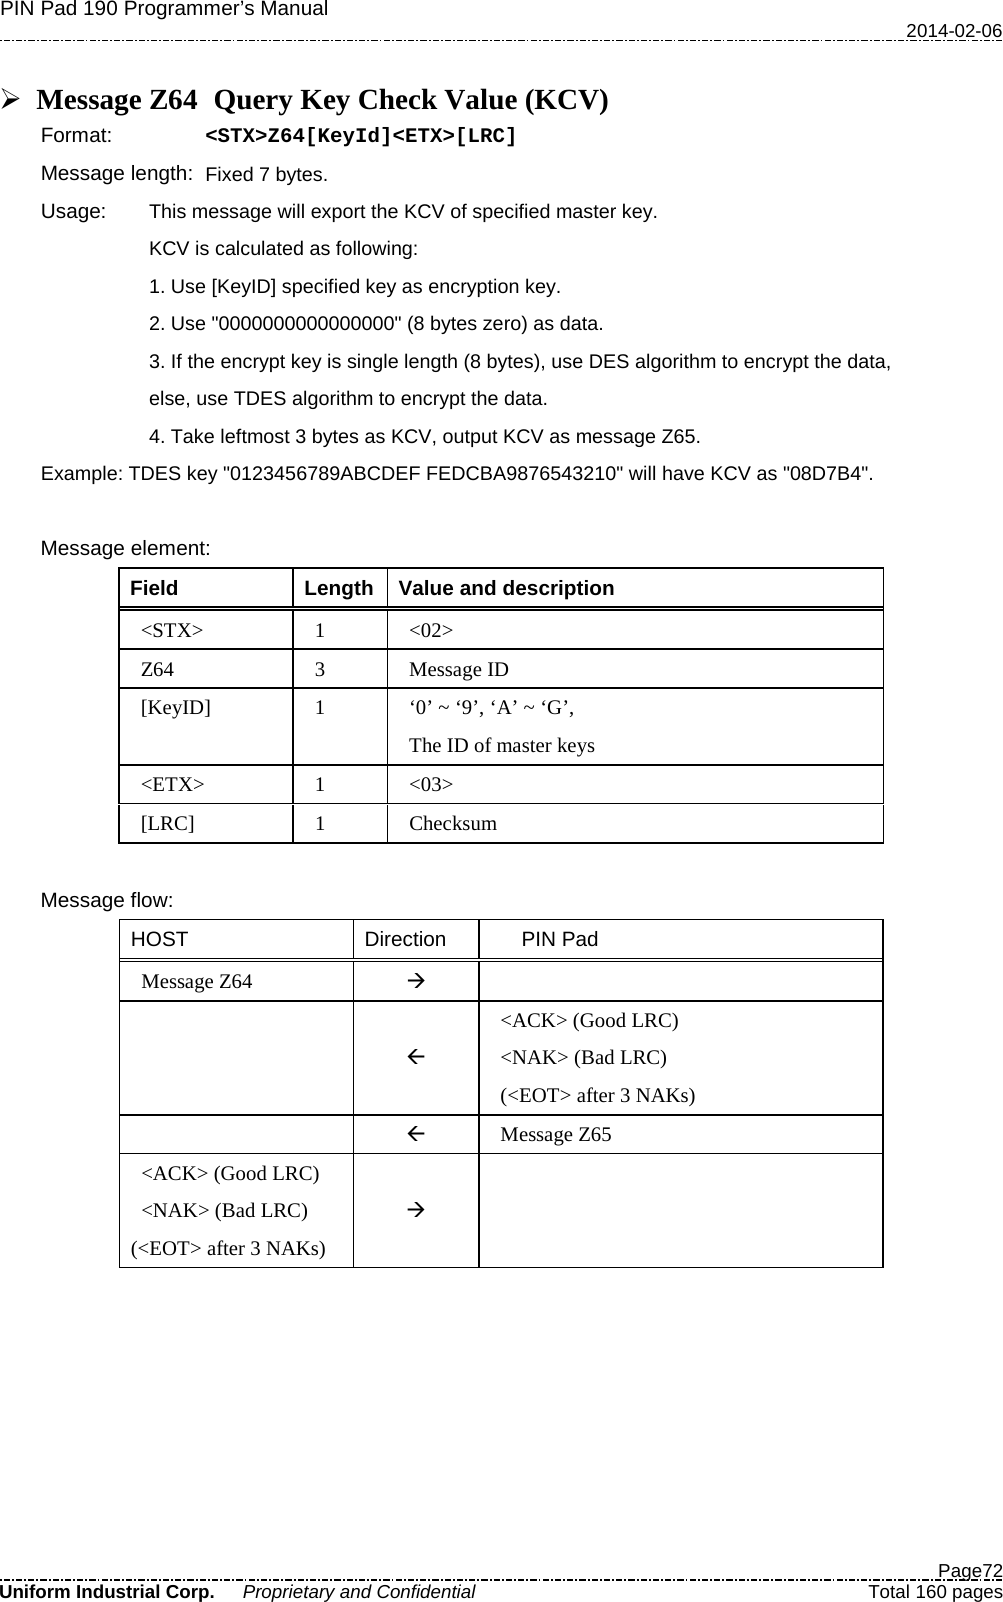 PIN Pad 190 Programmer’s Manual   2014-02-06  Page72 Uniform Industrial Corp. Proprietary and Confidential  Total 160 pages   Message Z64   Query Key Check Value (KCV) Format:   &lt;STX&gt;Z64[KeyId]&lt;ETX&gt;[LRC] Message length: Fixed 7 bytes. Usage: This message will export the KCV of specified master key. KCV is calculated as following: 1. Use [KeyID] specified key as encryption key. 2. Use &quot;0000000000000000&quot; (8 bytes zero) as data. 3. If the encrypt key is single length (8 bytes), use DES algorithm to encrypt the data, else, use TDES algorithm to encrypt the data. 4. Take leftmost 3 bytes as KCV, output KCV as message Z65. Example: TDES key &quot;0123456789ABCDEF FEDCBA9876543210&quot; will have KCV as &quot;08D7B4&quot;.  Message element: Field  Length  Value and description &lt;STX&gt;  1  &lt;02&gt; Z64  3  Message ID [KeyID]  1  ‘0’ ~ ‘9’, ‘A’ ~ ‘G’, The ID of master keys &lt;ETX&gt;  1  &lt;03&gt; [LRC]  1  Checksum  Message flow: HOST Direction    PIN Pad Message Z64     &lt;ACK&gt; (Good LRC) &lt;NAK&gt; (Bad LRC) (&lt;EOT&gt; after 3 NAKs)   Message Z65 &lt;ACK&gt; (Good LRC) &lt;NAK&gt; (Bad LRC) (&lt;EOT&gt; after 3 NAKs)     